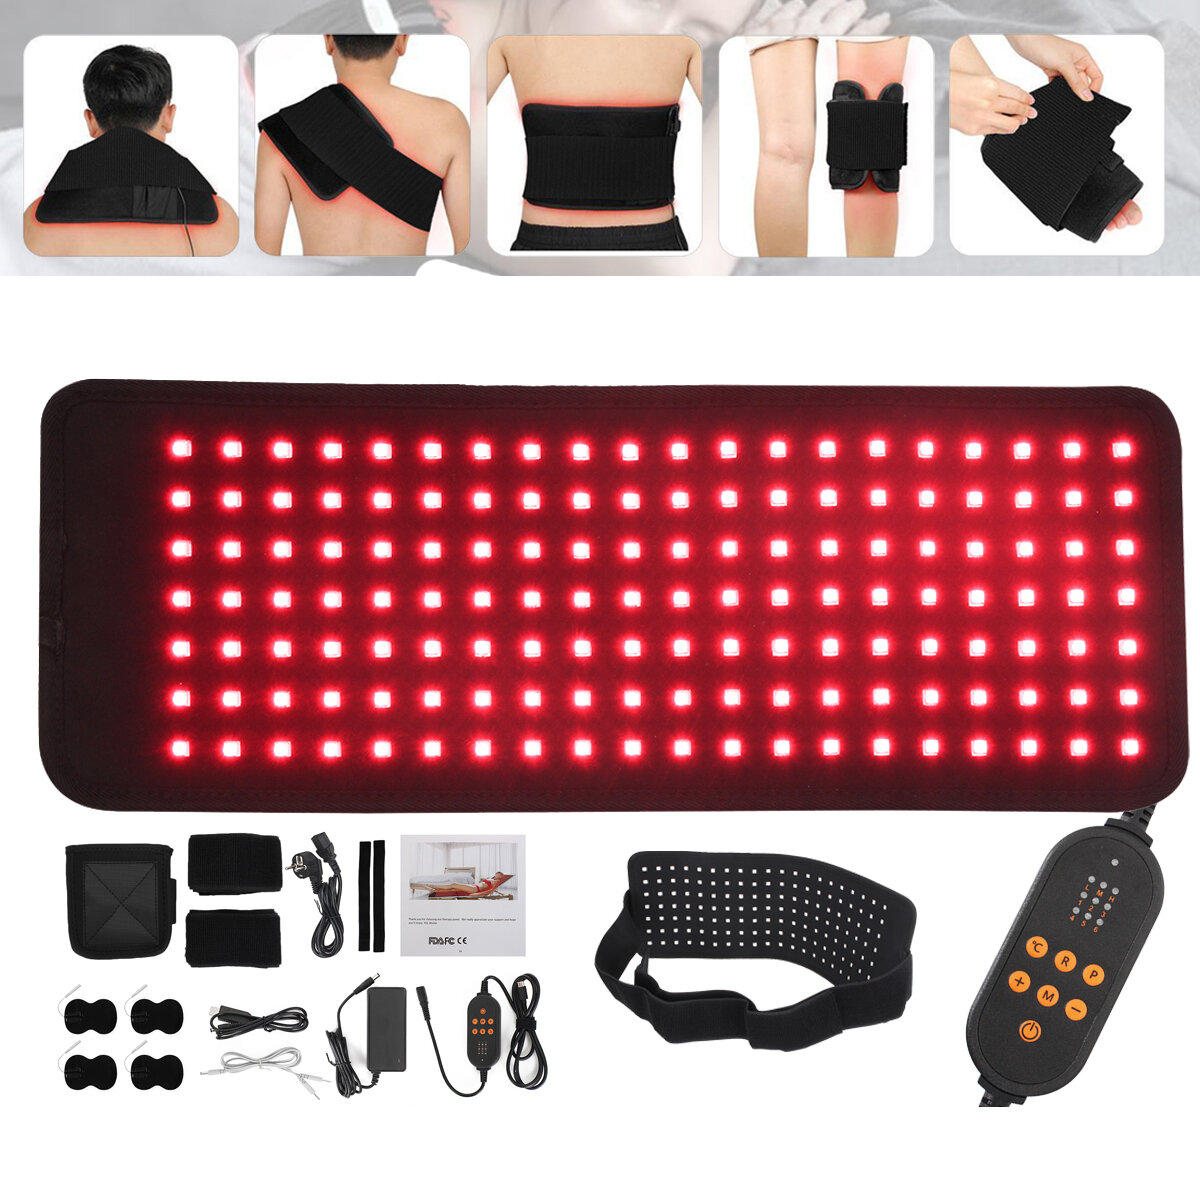 Multifunctional EMS Infrared Heating Massage Belts Deep Therapy Pad Shoulder Joint Muscle Pain Red Light Therapy Belt